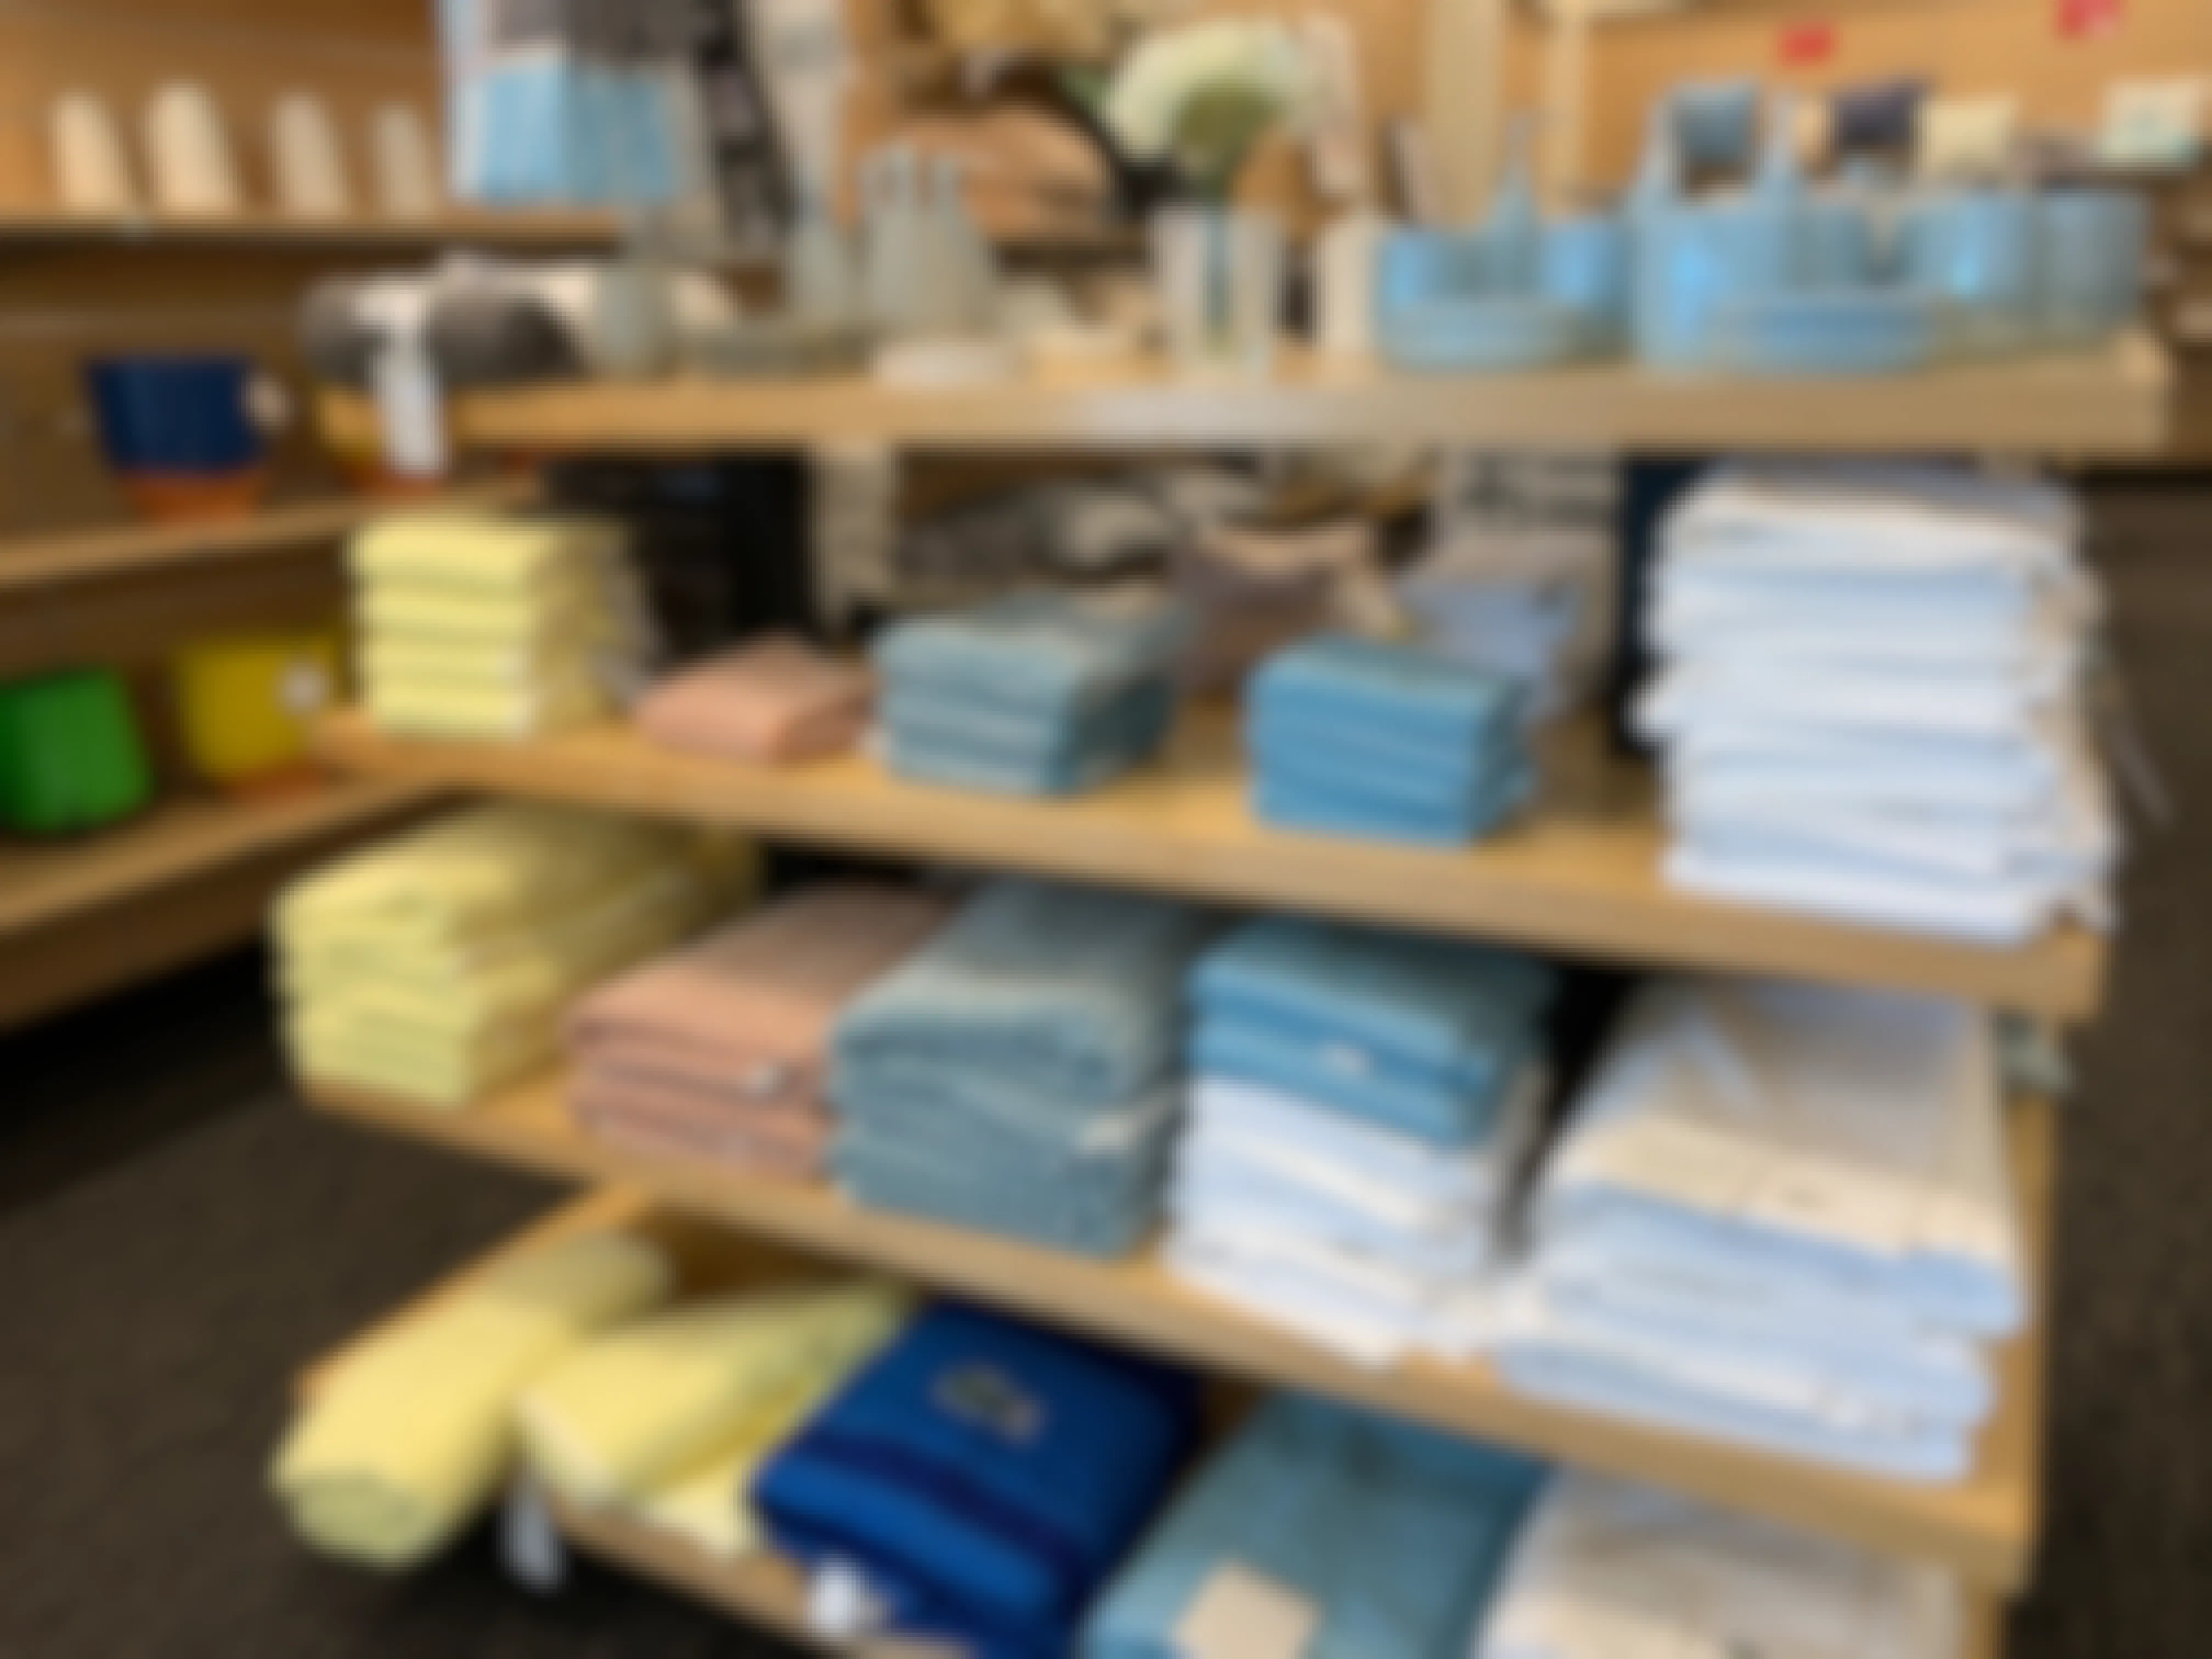 A display of towels and bath decor inside nordstrom rack.